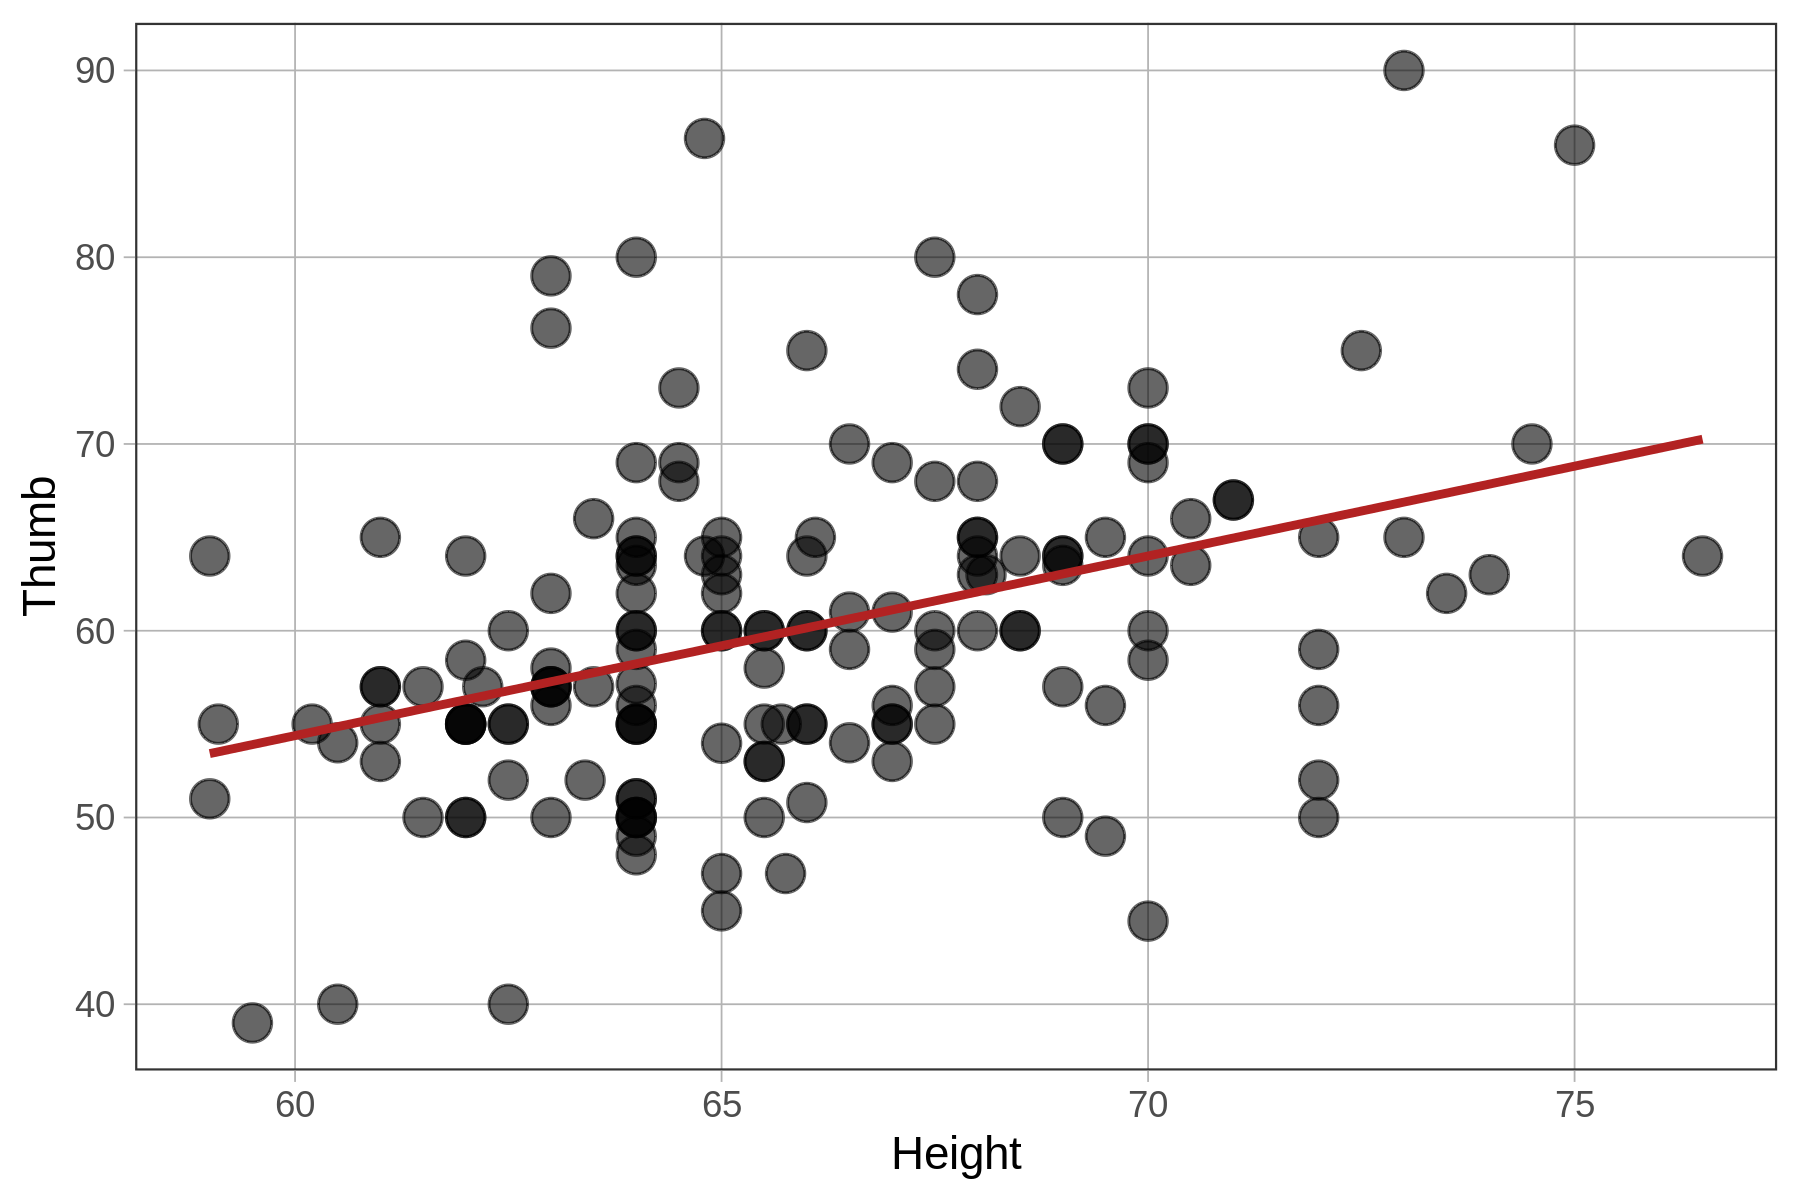 A scatterplot of the distribution of Thumb by Height overlaid with best-fitting regression line.